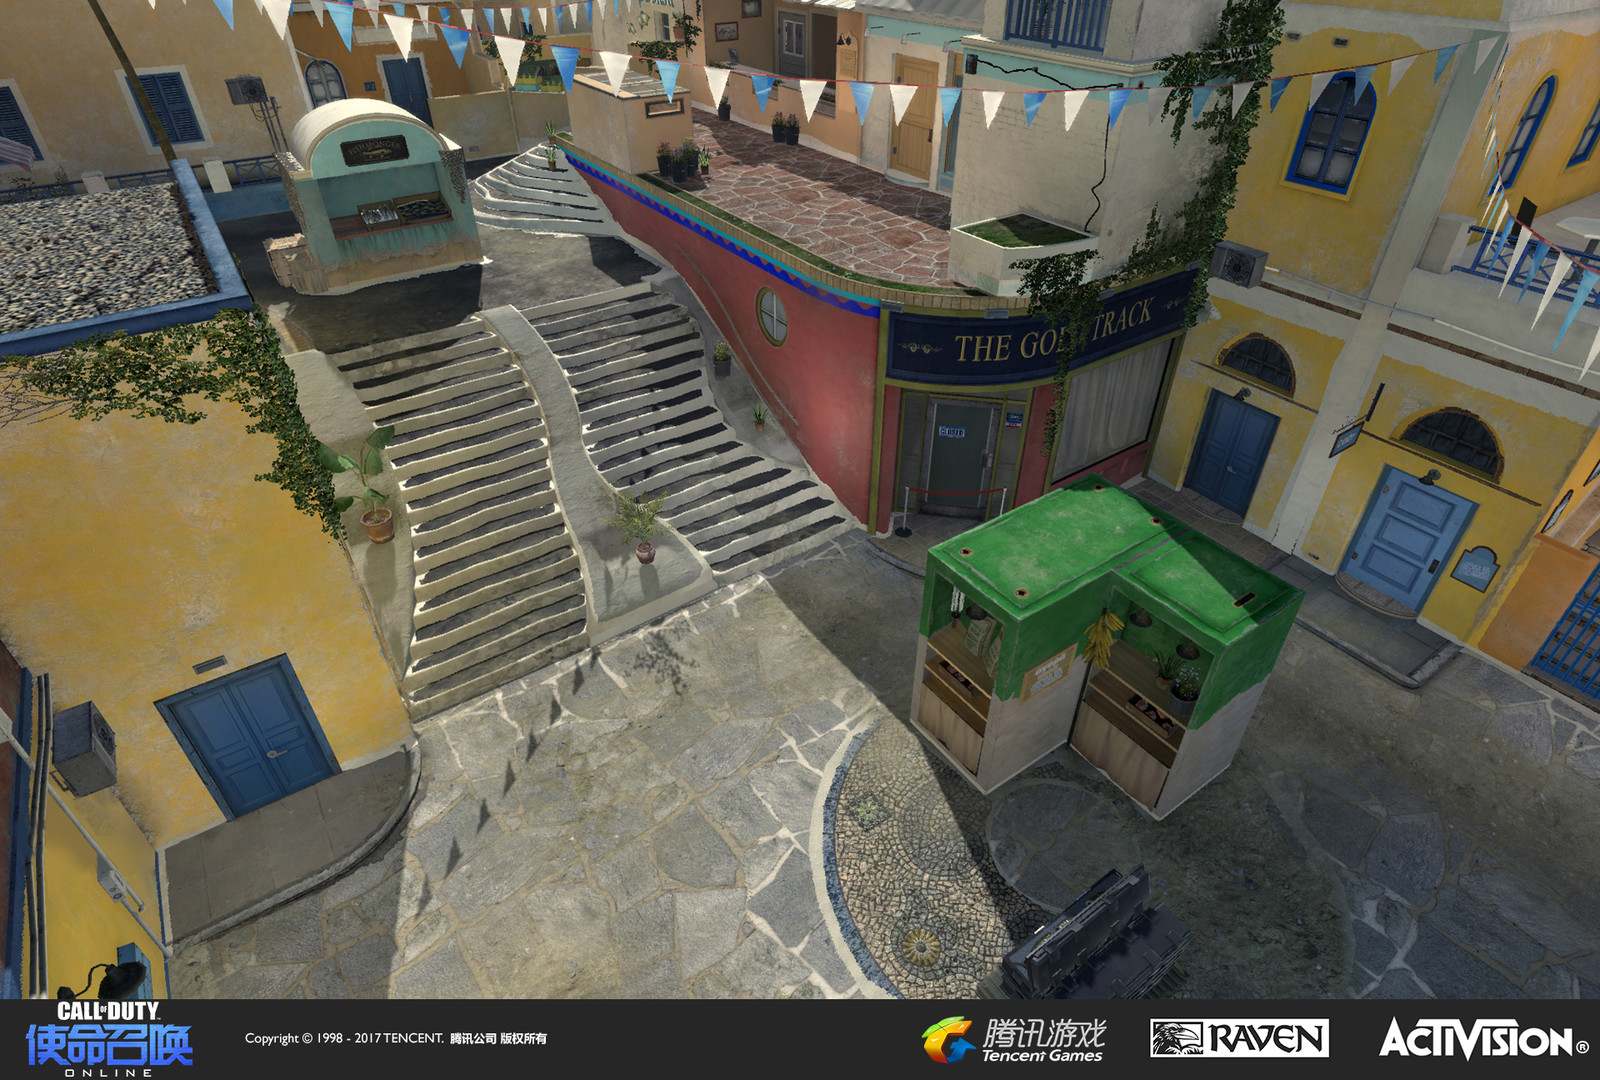 I worked on the courtyard terrain  (upper and lower) with geo and material creation. I also created the "Gold Track" storefront. Other storefronts in this view were created by Raquel Garcia.